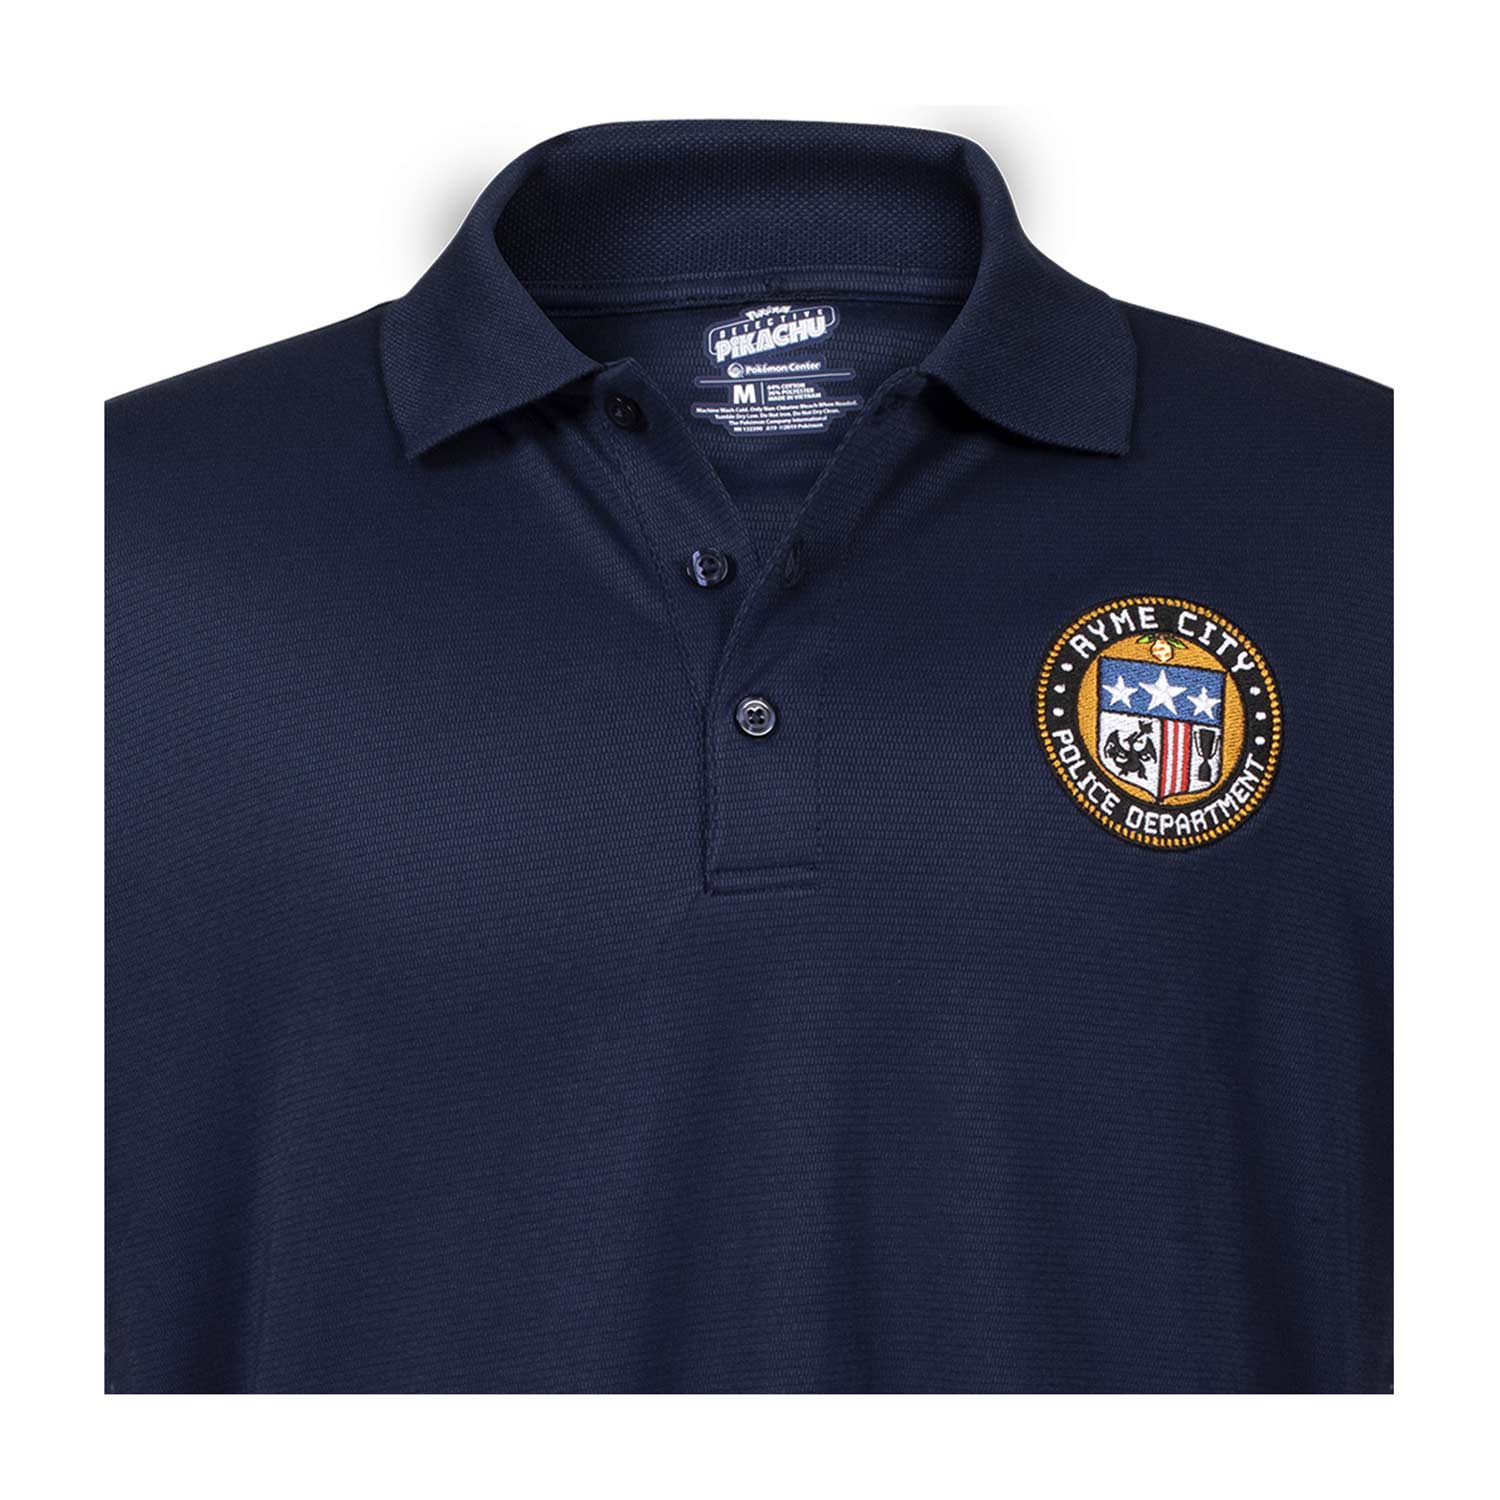 Adult Sizes POLICE COAT OF ARMS BLUE STYLE T-SHIRT